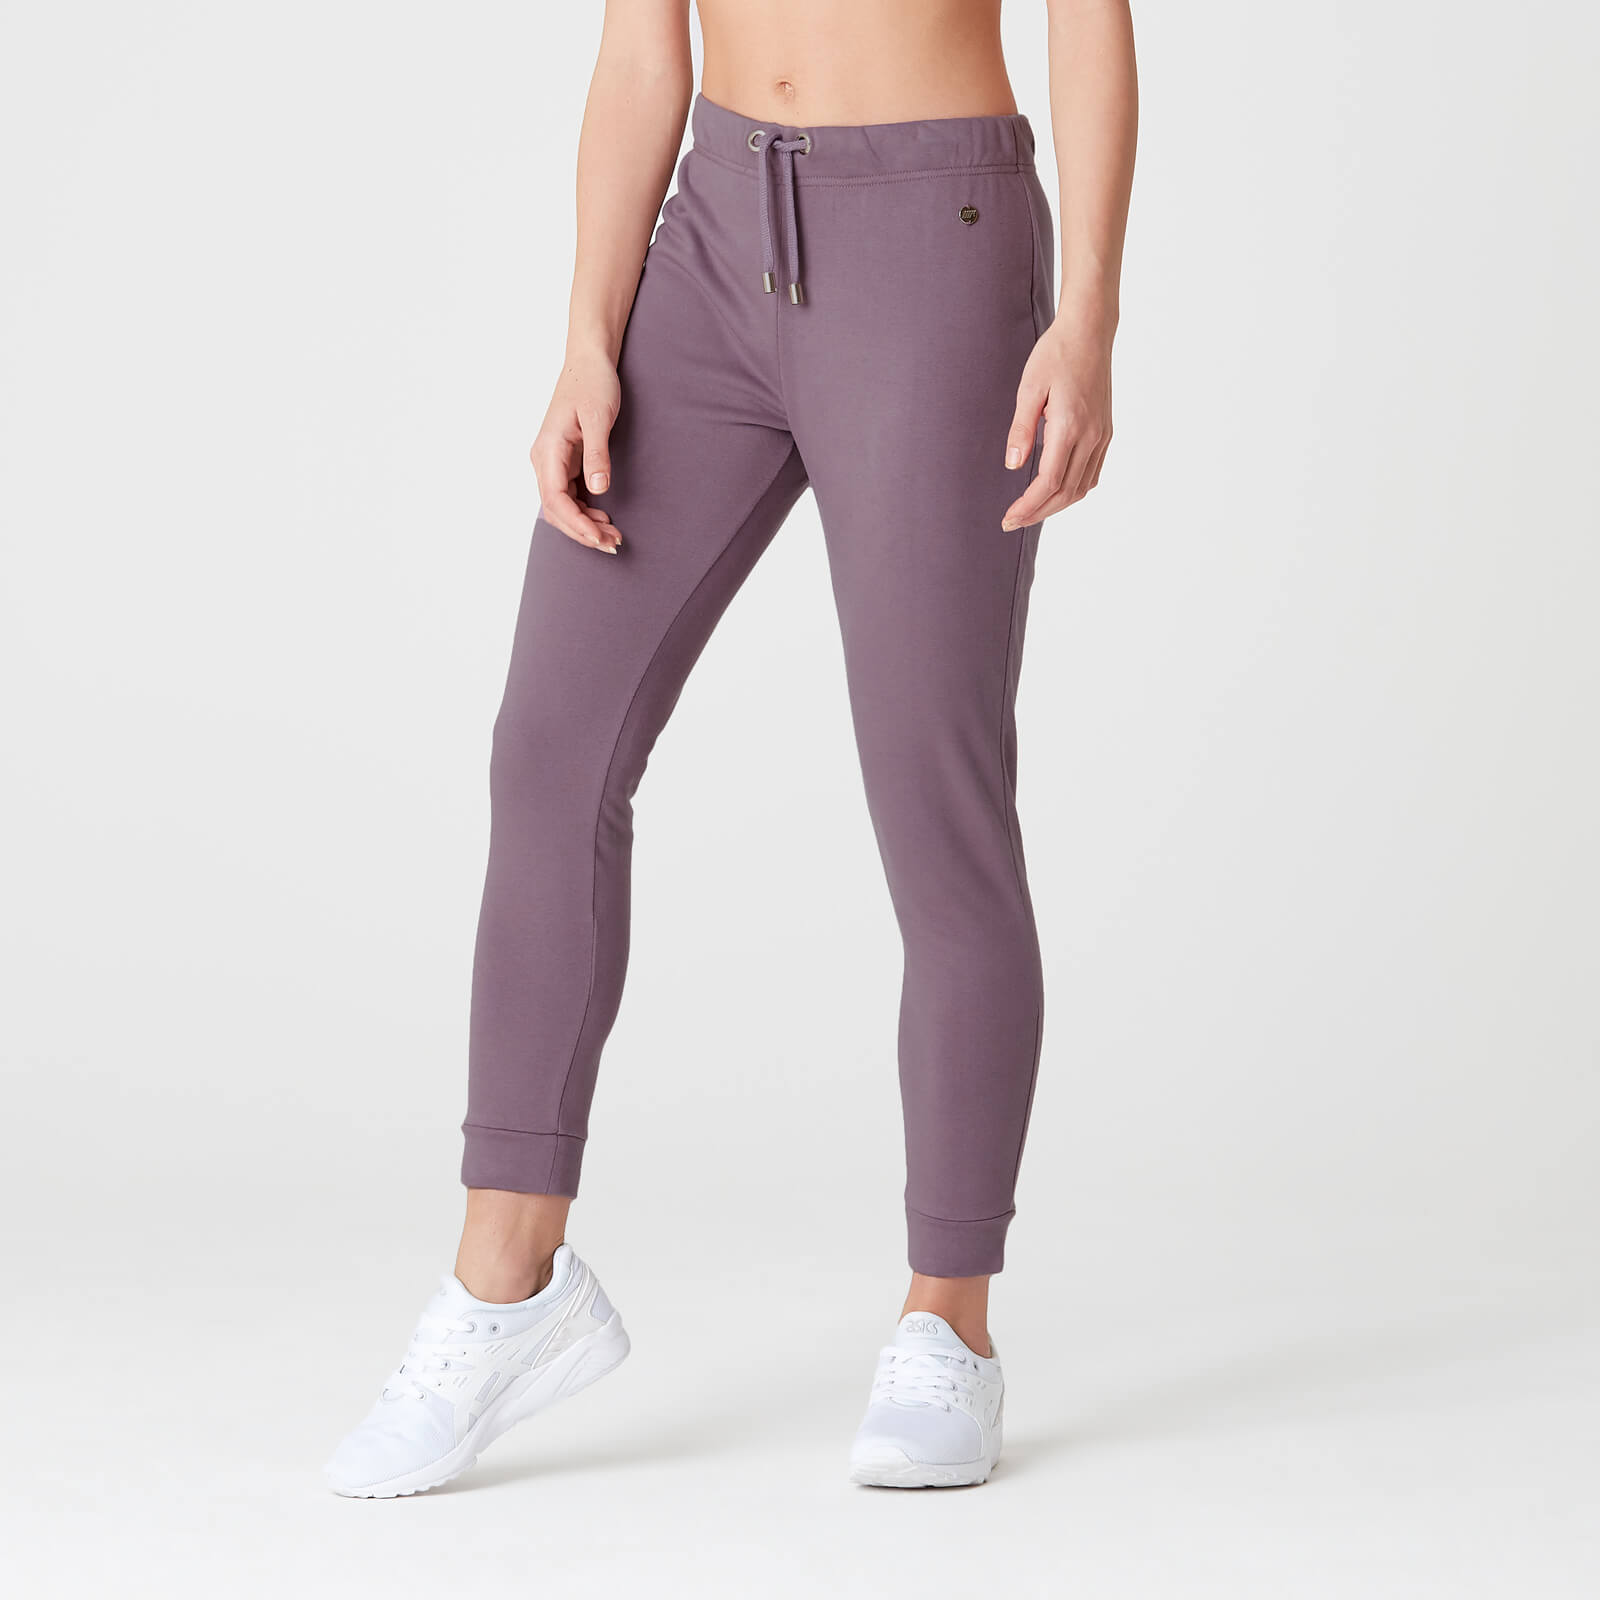 Myprotein Luxe Lounge Jogger - Mauve - L